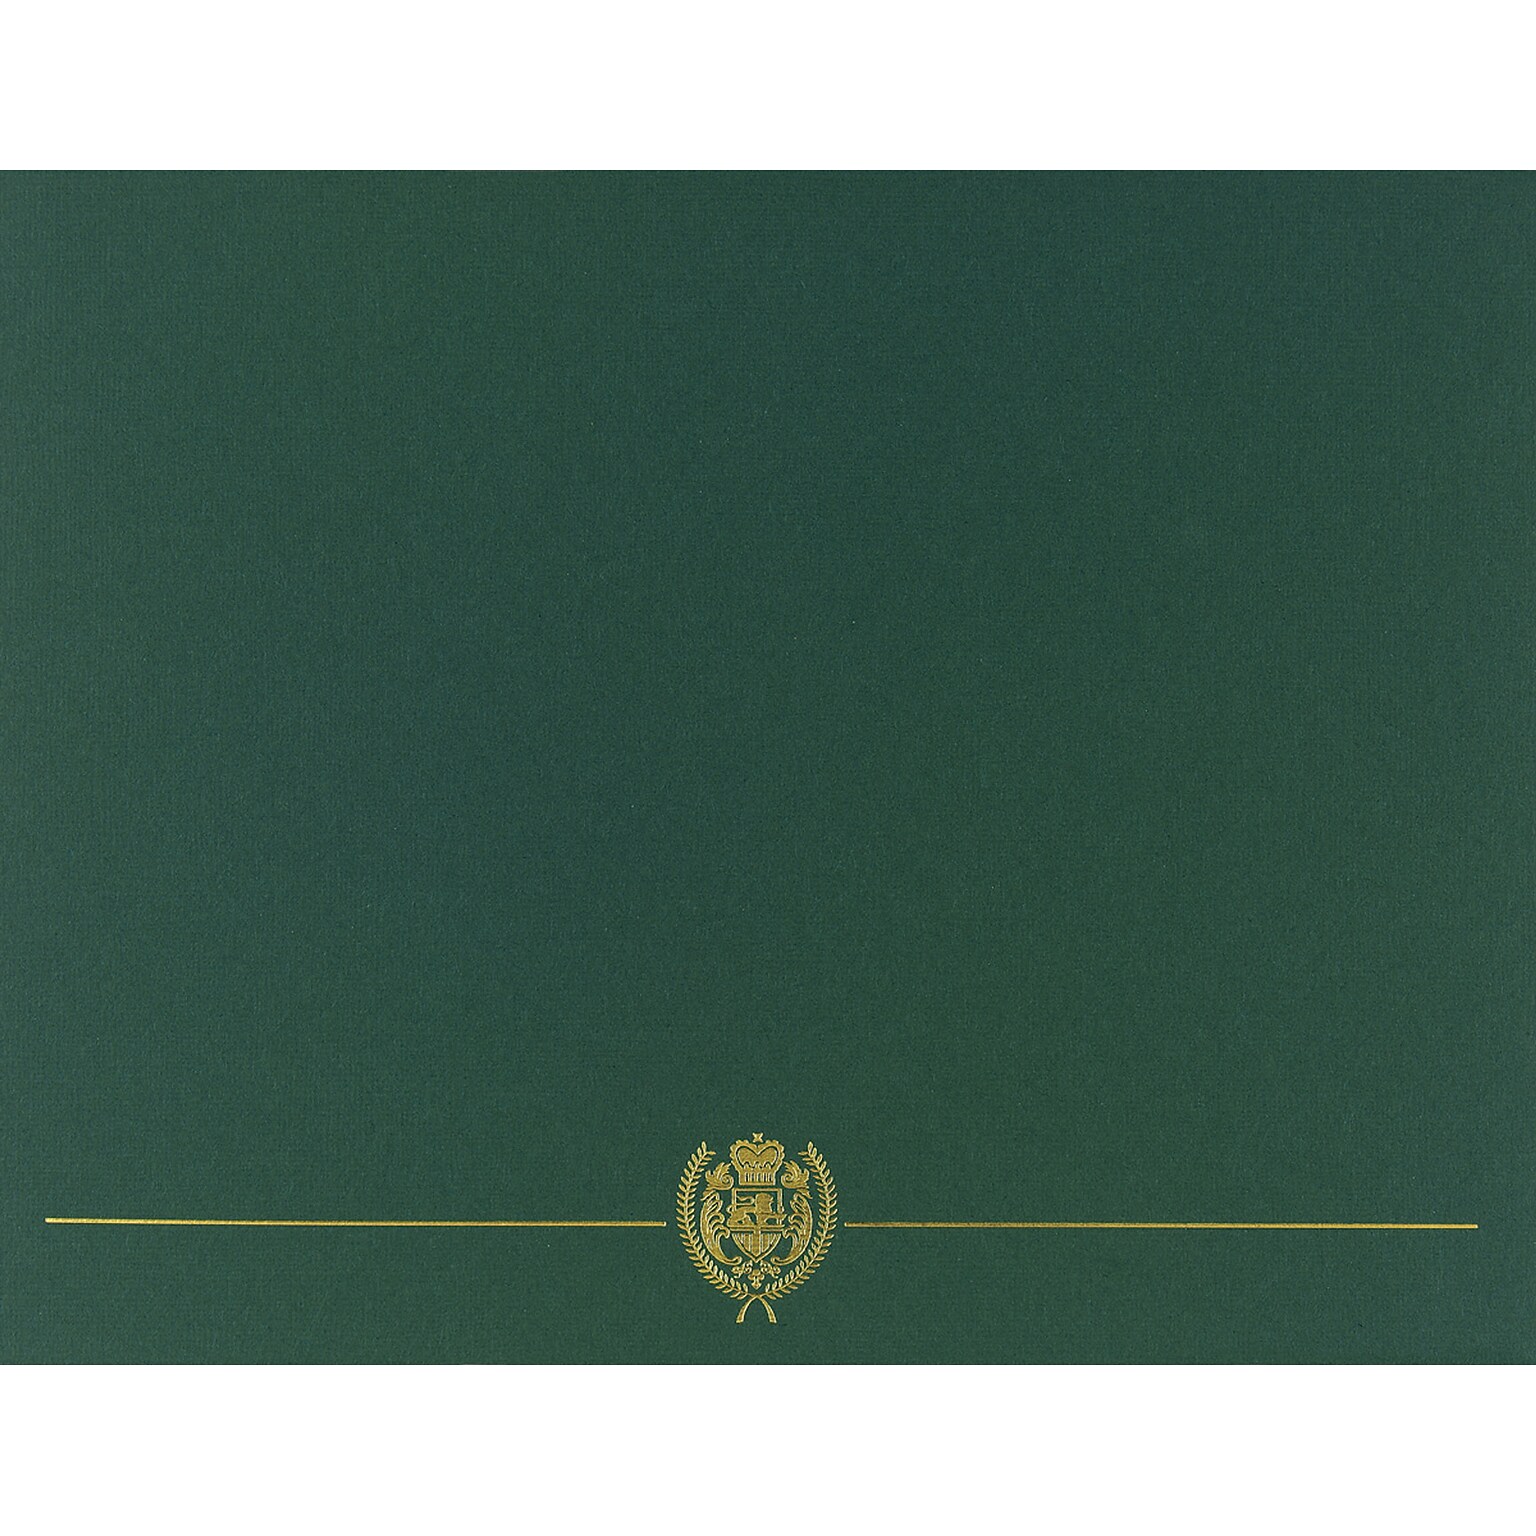 Great Papers Classic Crest Certificate Holders, 8.5 x 11, Hunter, 5/Pack (903118)